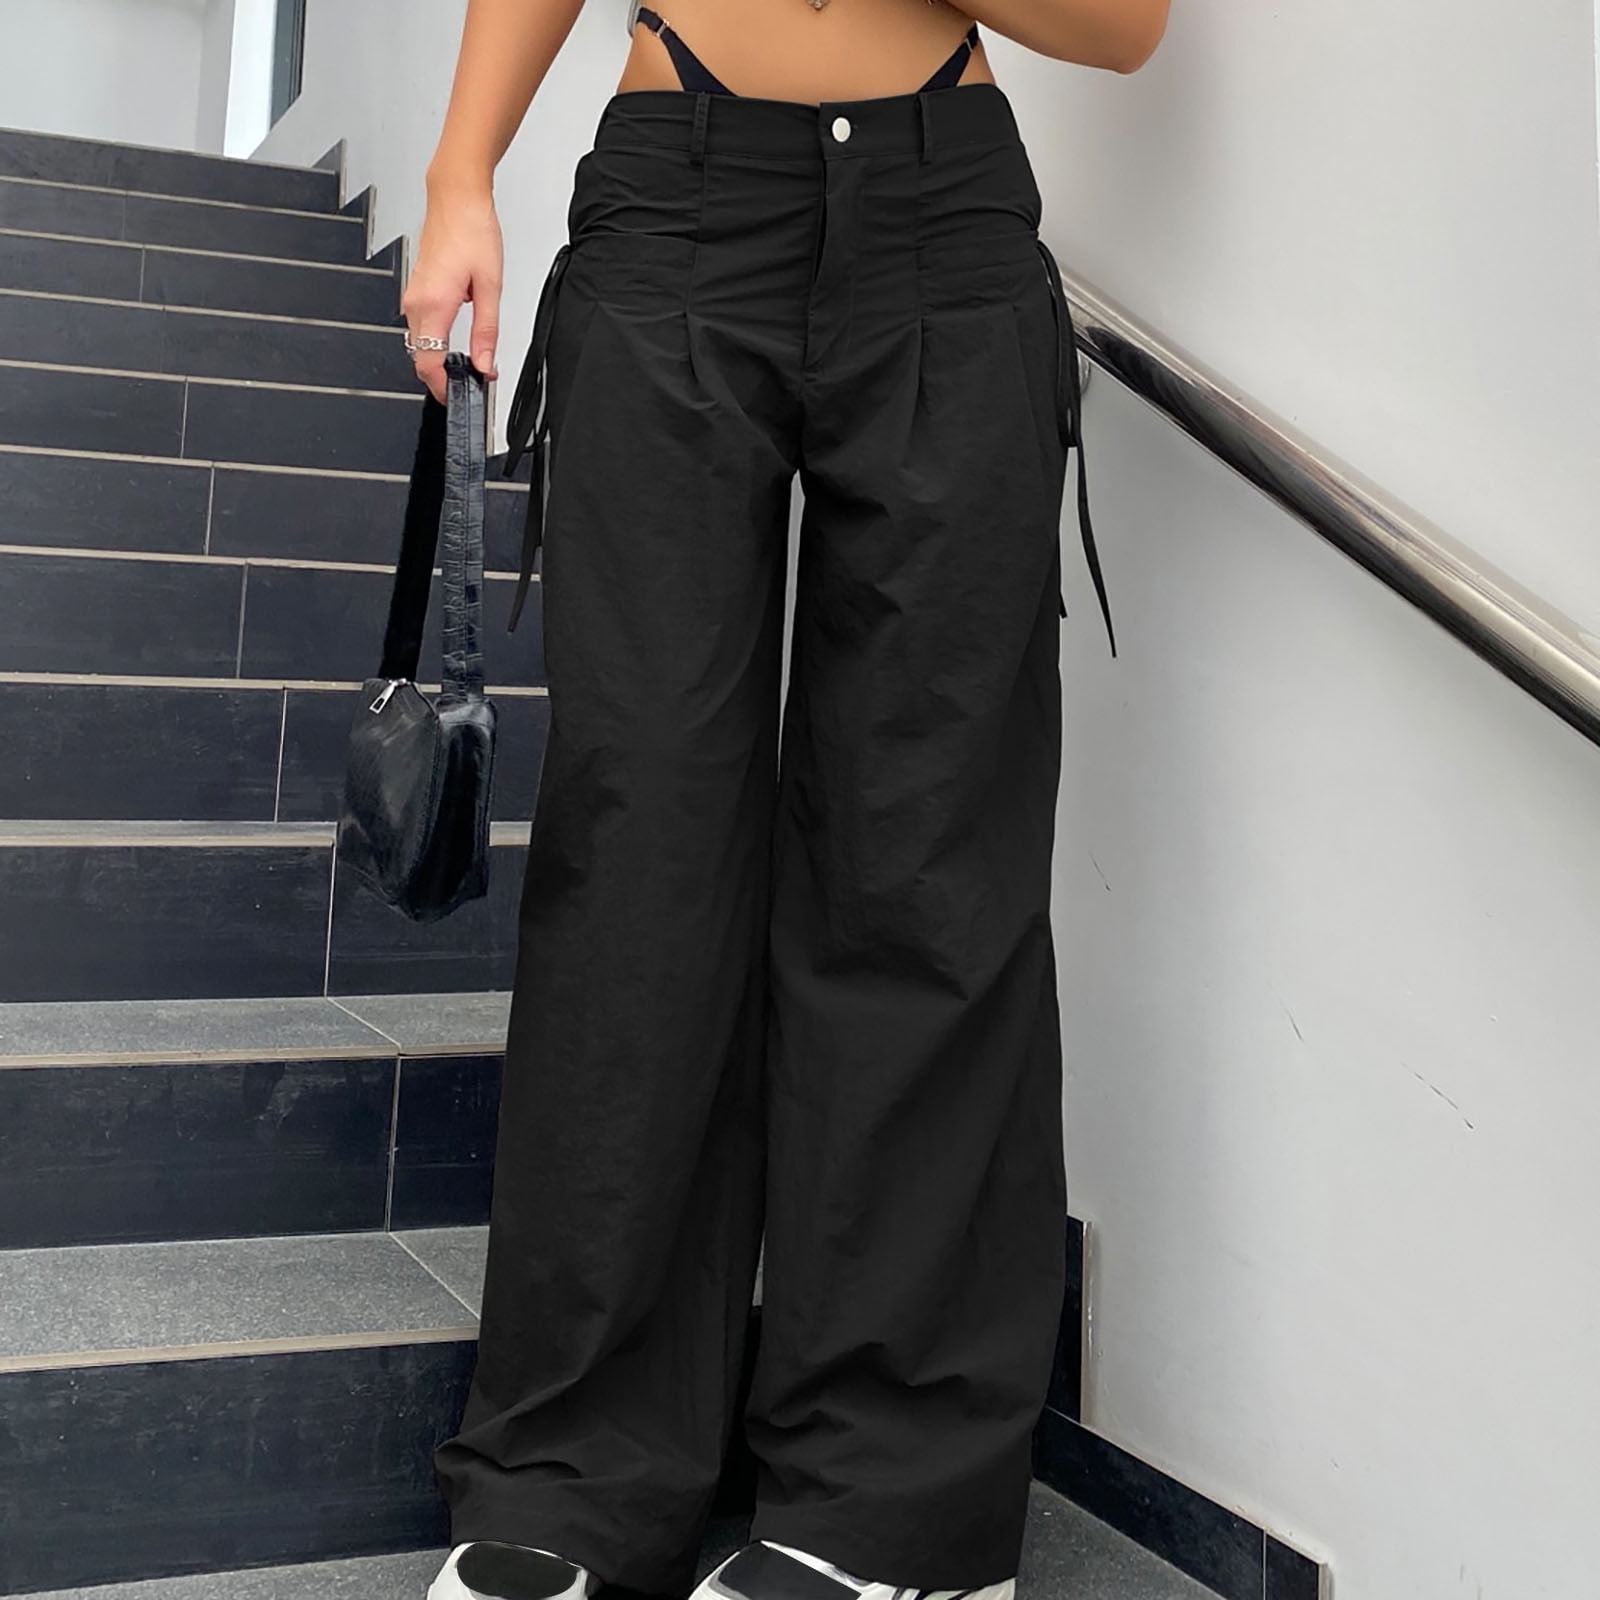 Pants Multi Wear Style SELONE Trendy Workout Cargo Low Size Pant Pockets Street Fashion Women Design Rise Sports Black Everyday Sense Running With Plus Long Y2K for Waist Overalls Low Pants Athletic